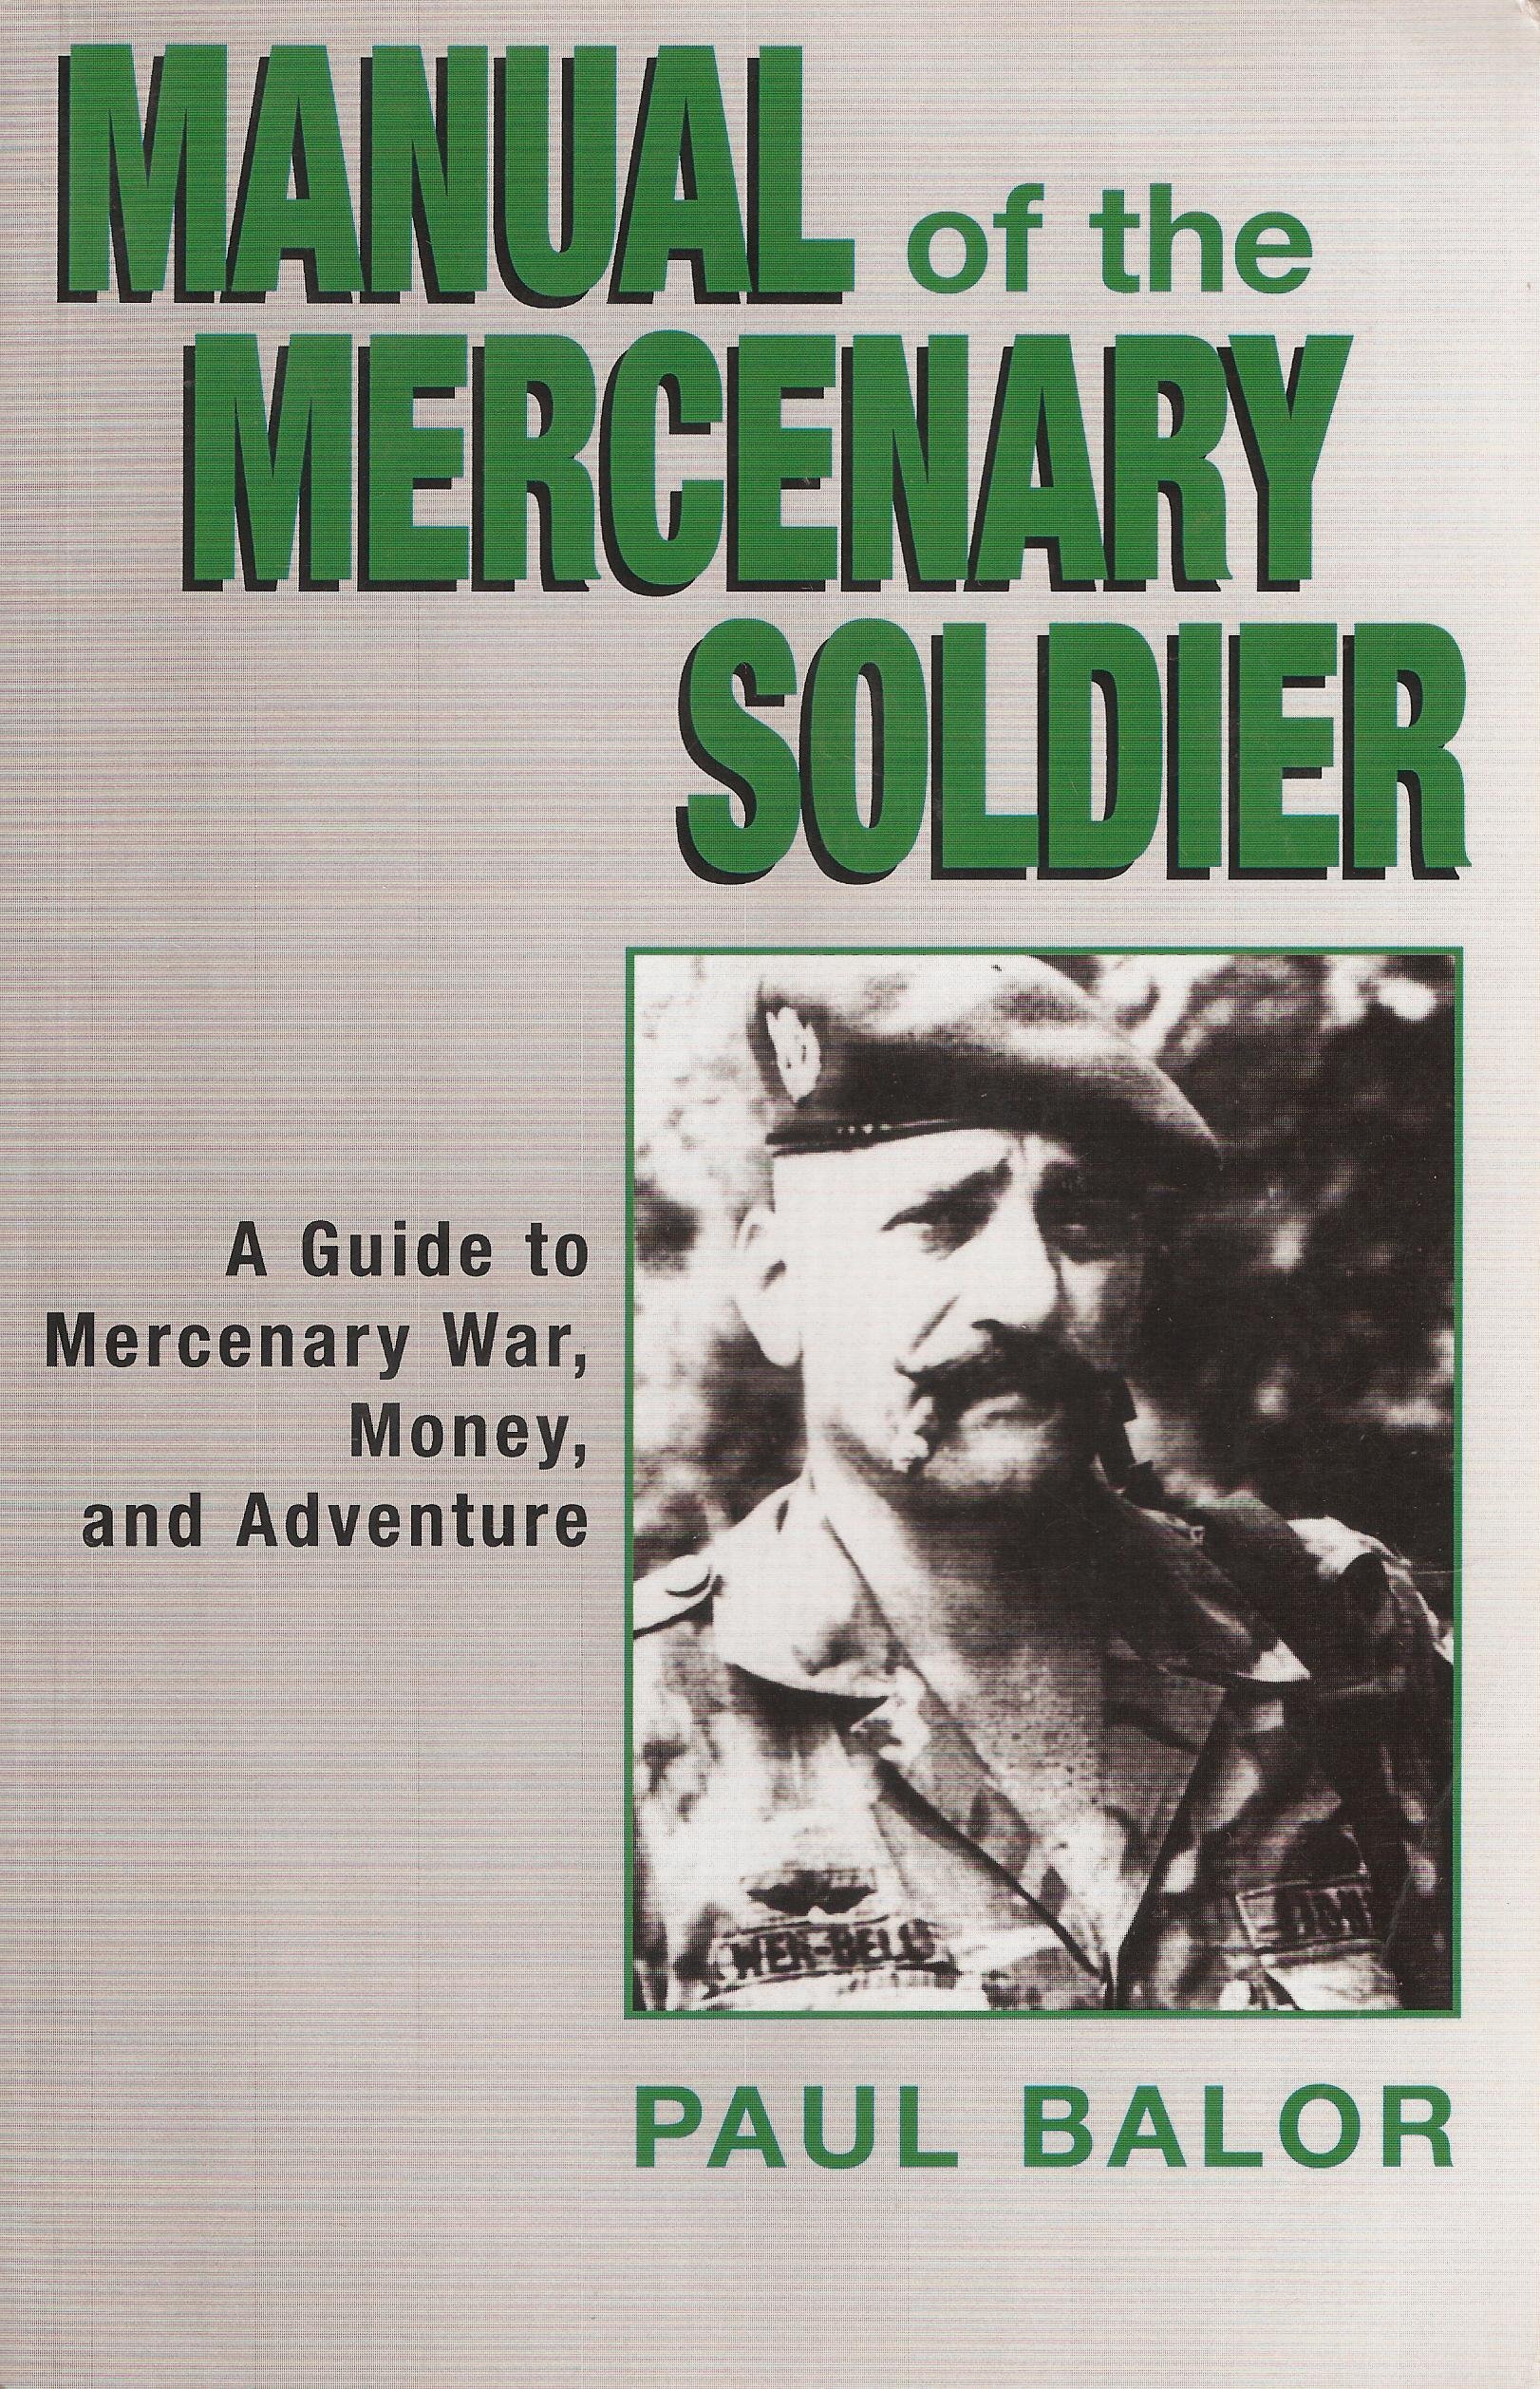 Manual of the Mercenary Soldier: A Guide to Mercenary War, Money, and Adventure